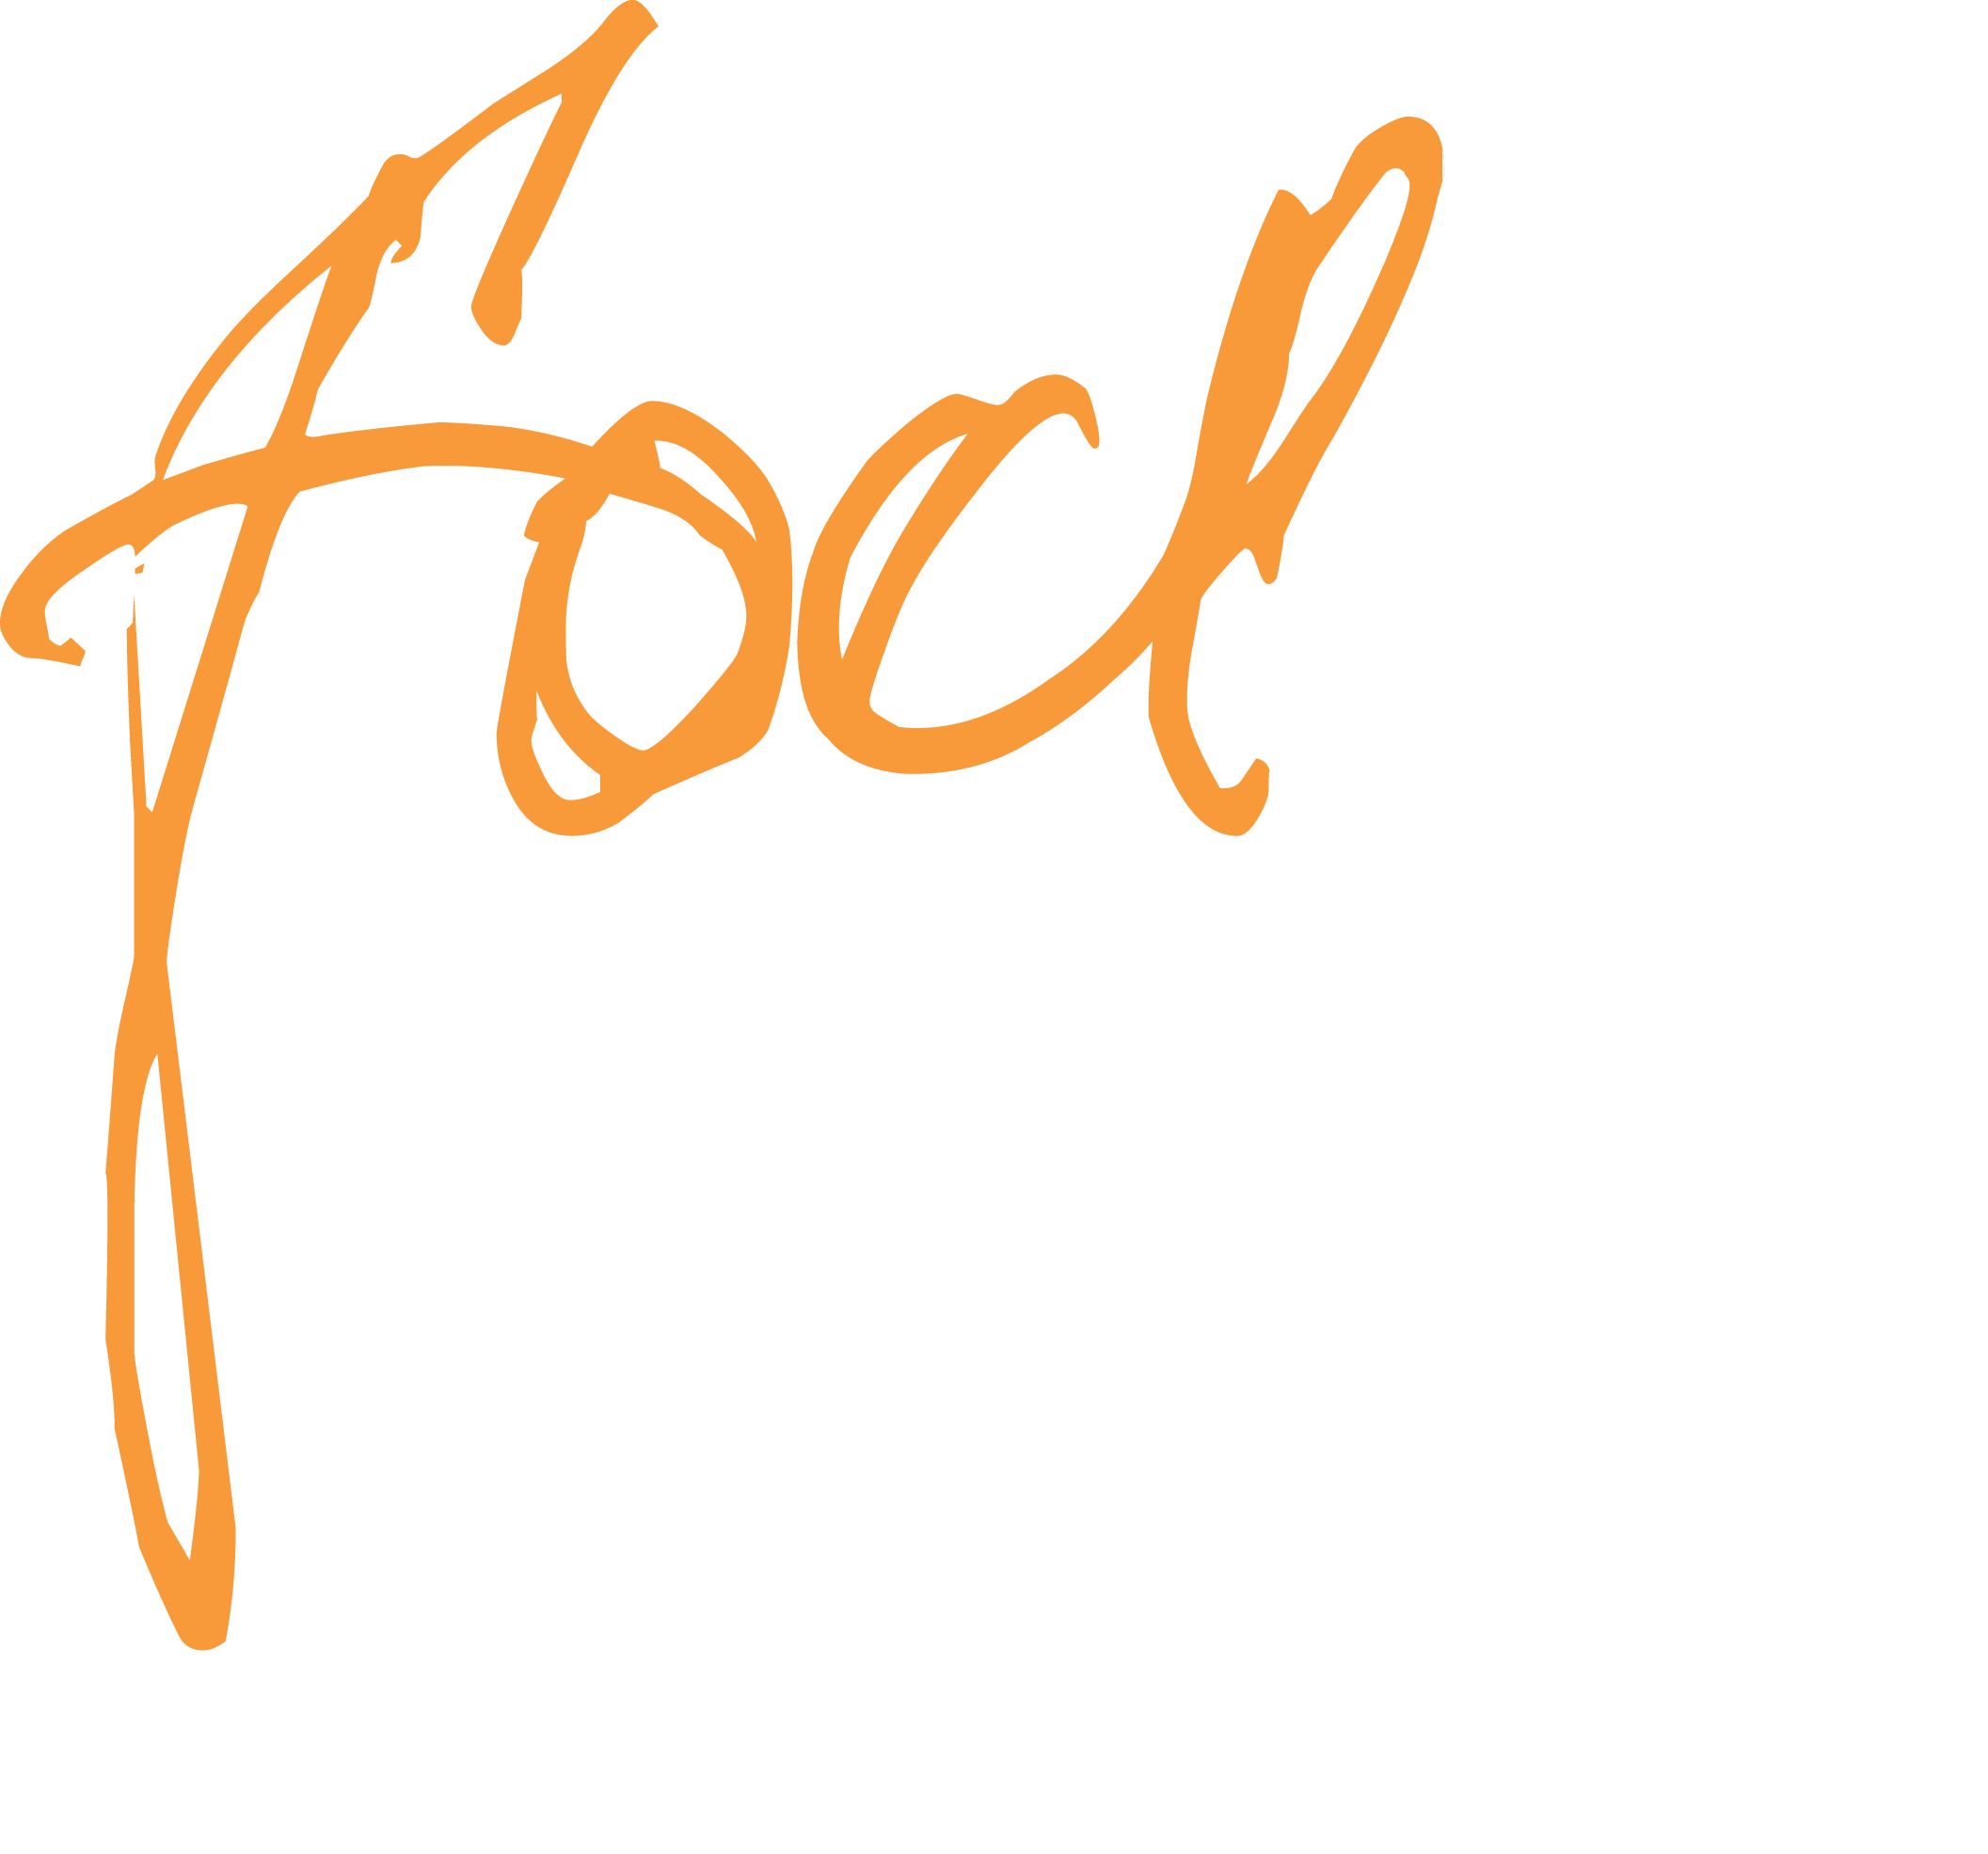 FOCL - Friends of the Central Library